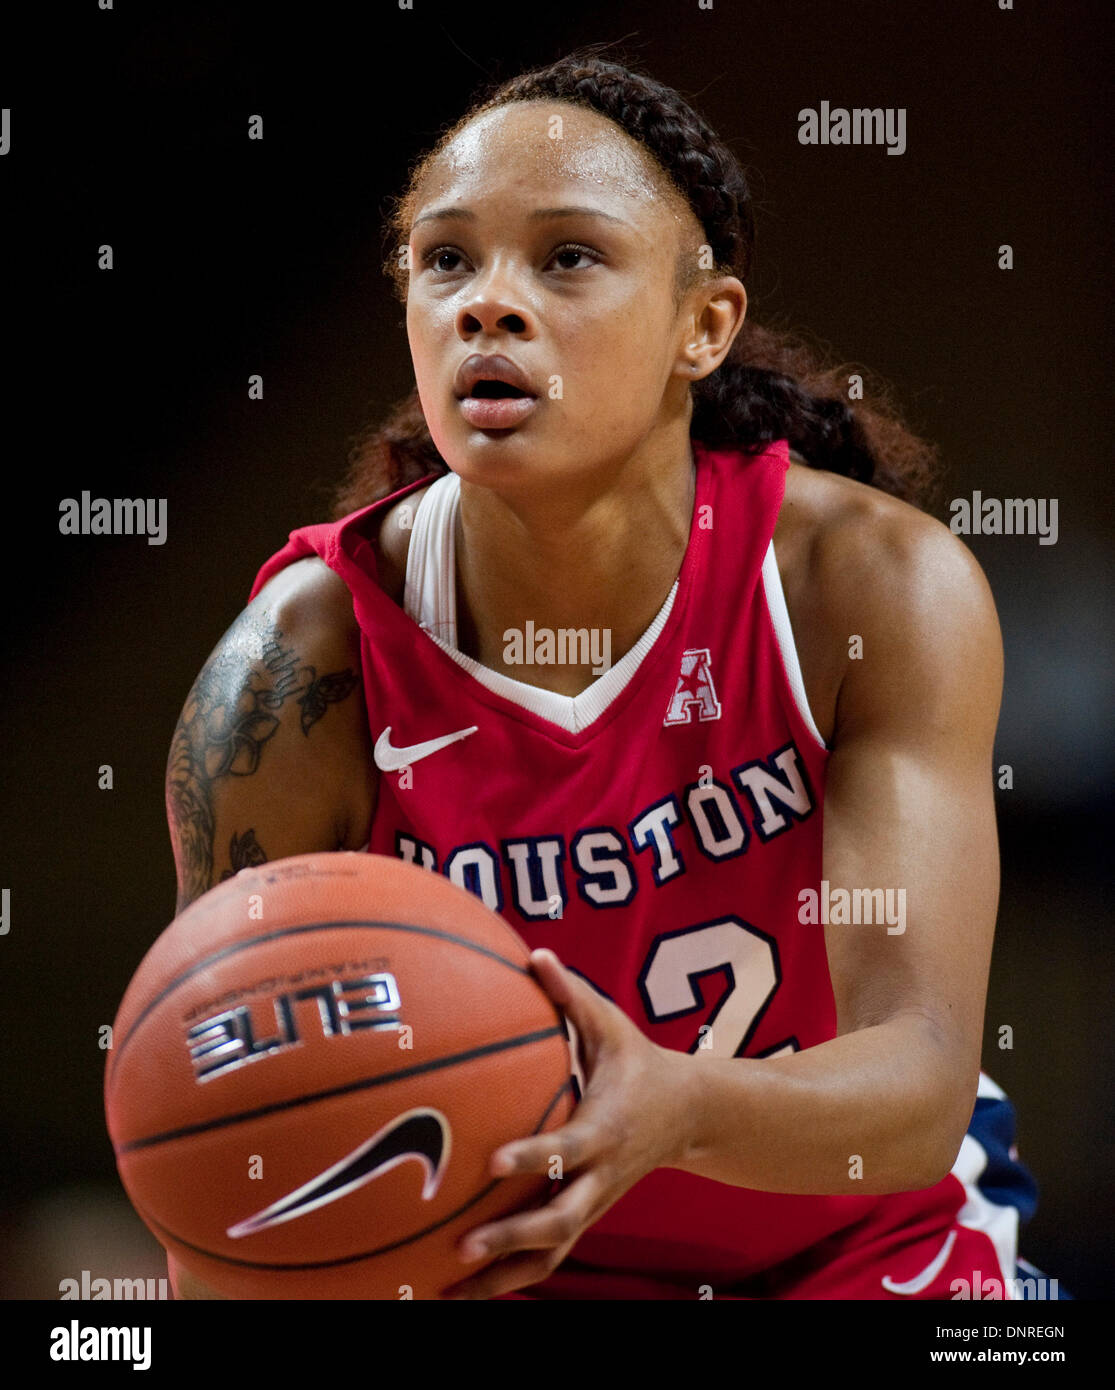 Piscataway, New Jersey, USA. 4th Jan, 2014. Houston's forward Te'onna  Campbell (32) at the foul line in the first half during American Athletic  Conference basketball action between the Rutgers Scarlet Knights and